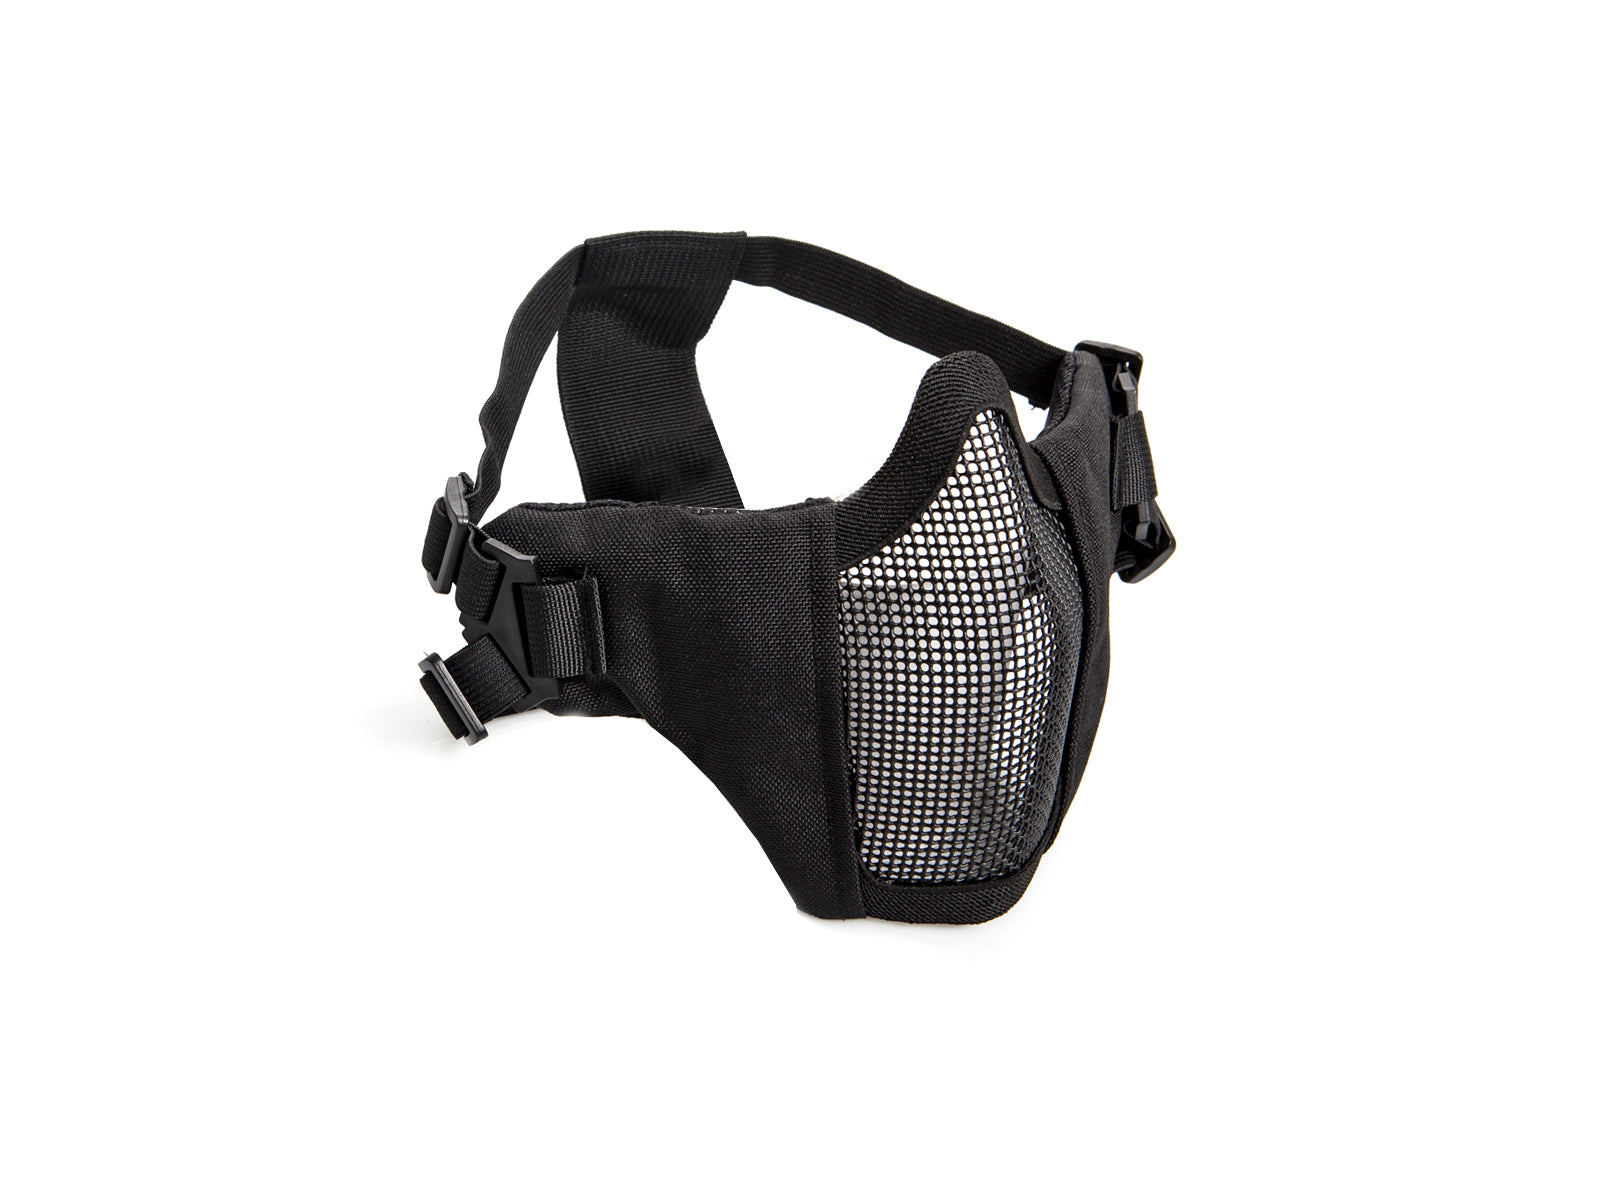 ASG Metal Mesh Mask with Cheek Pads